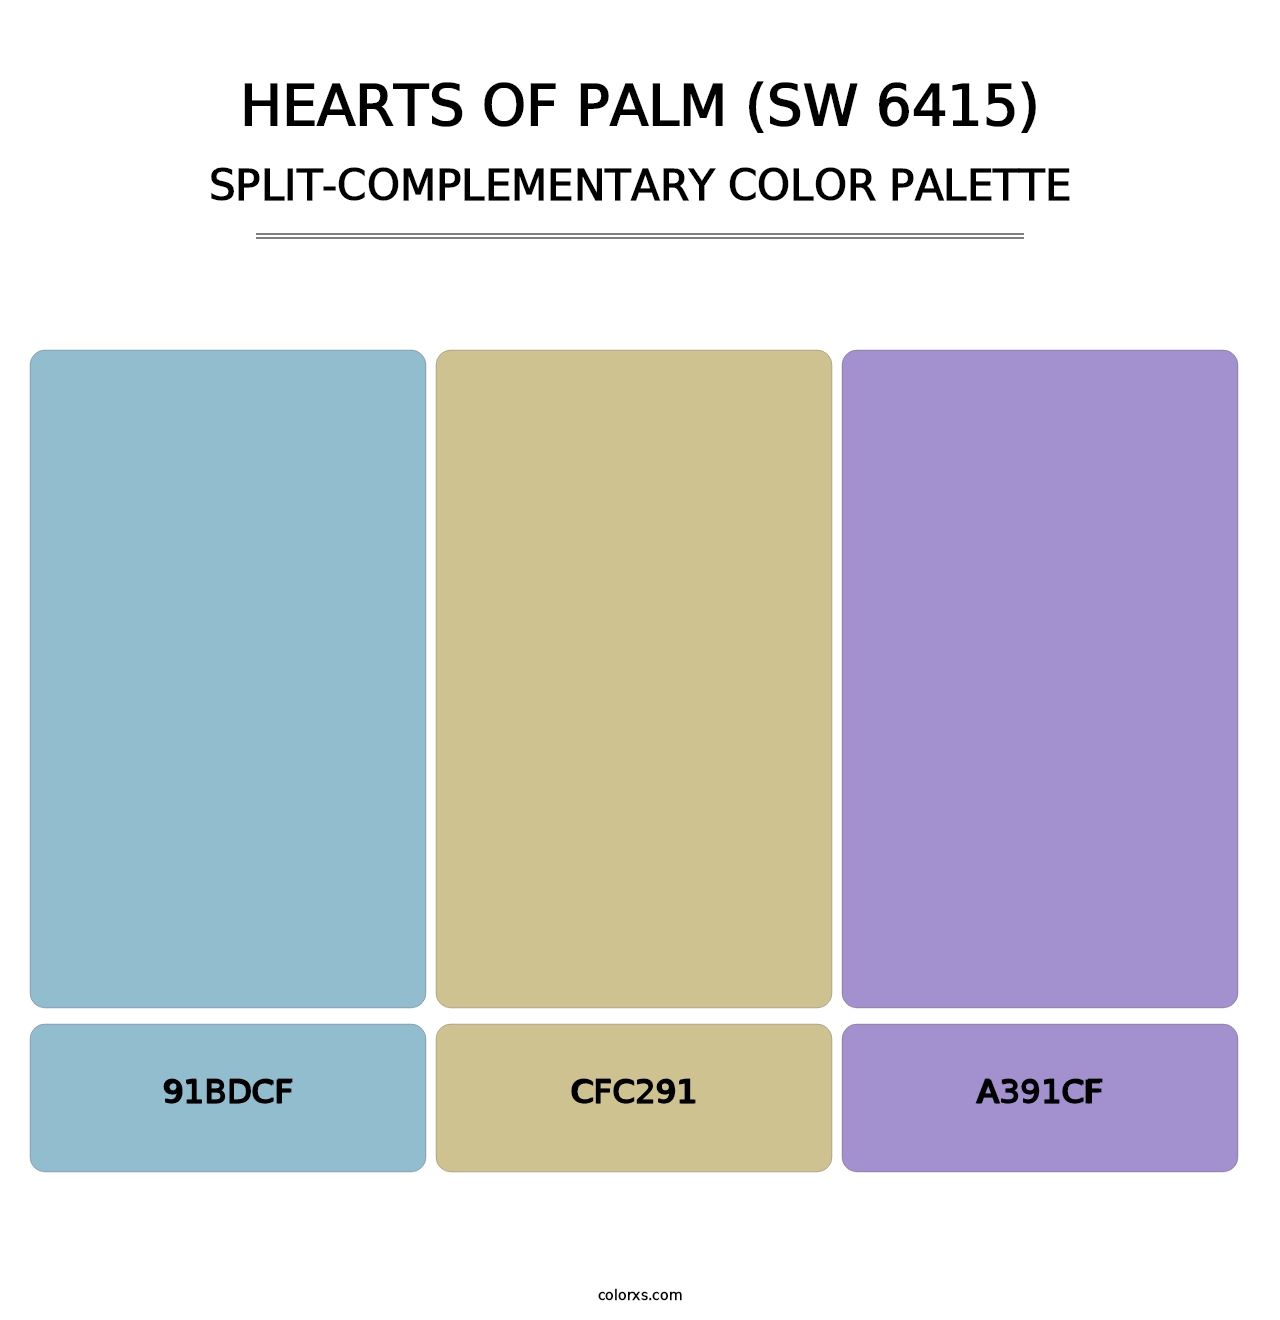 Hearts of Palm (SW 6415) - Split-Complementary Color Palette